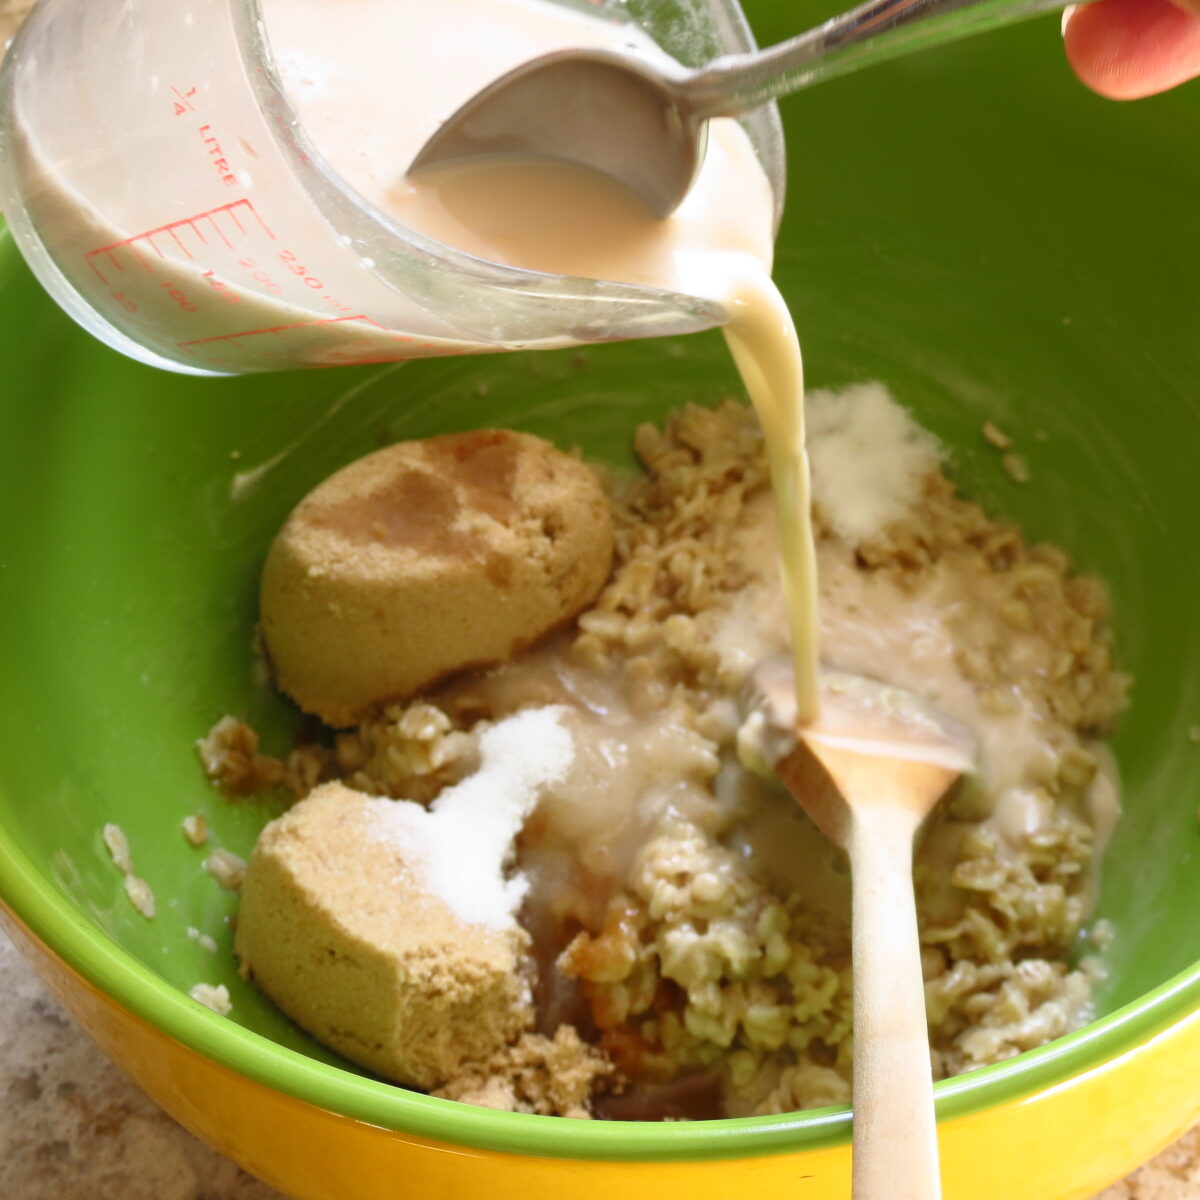 A cup of yeast and water mixture poured over a bowl of dry ingredients.